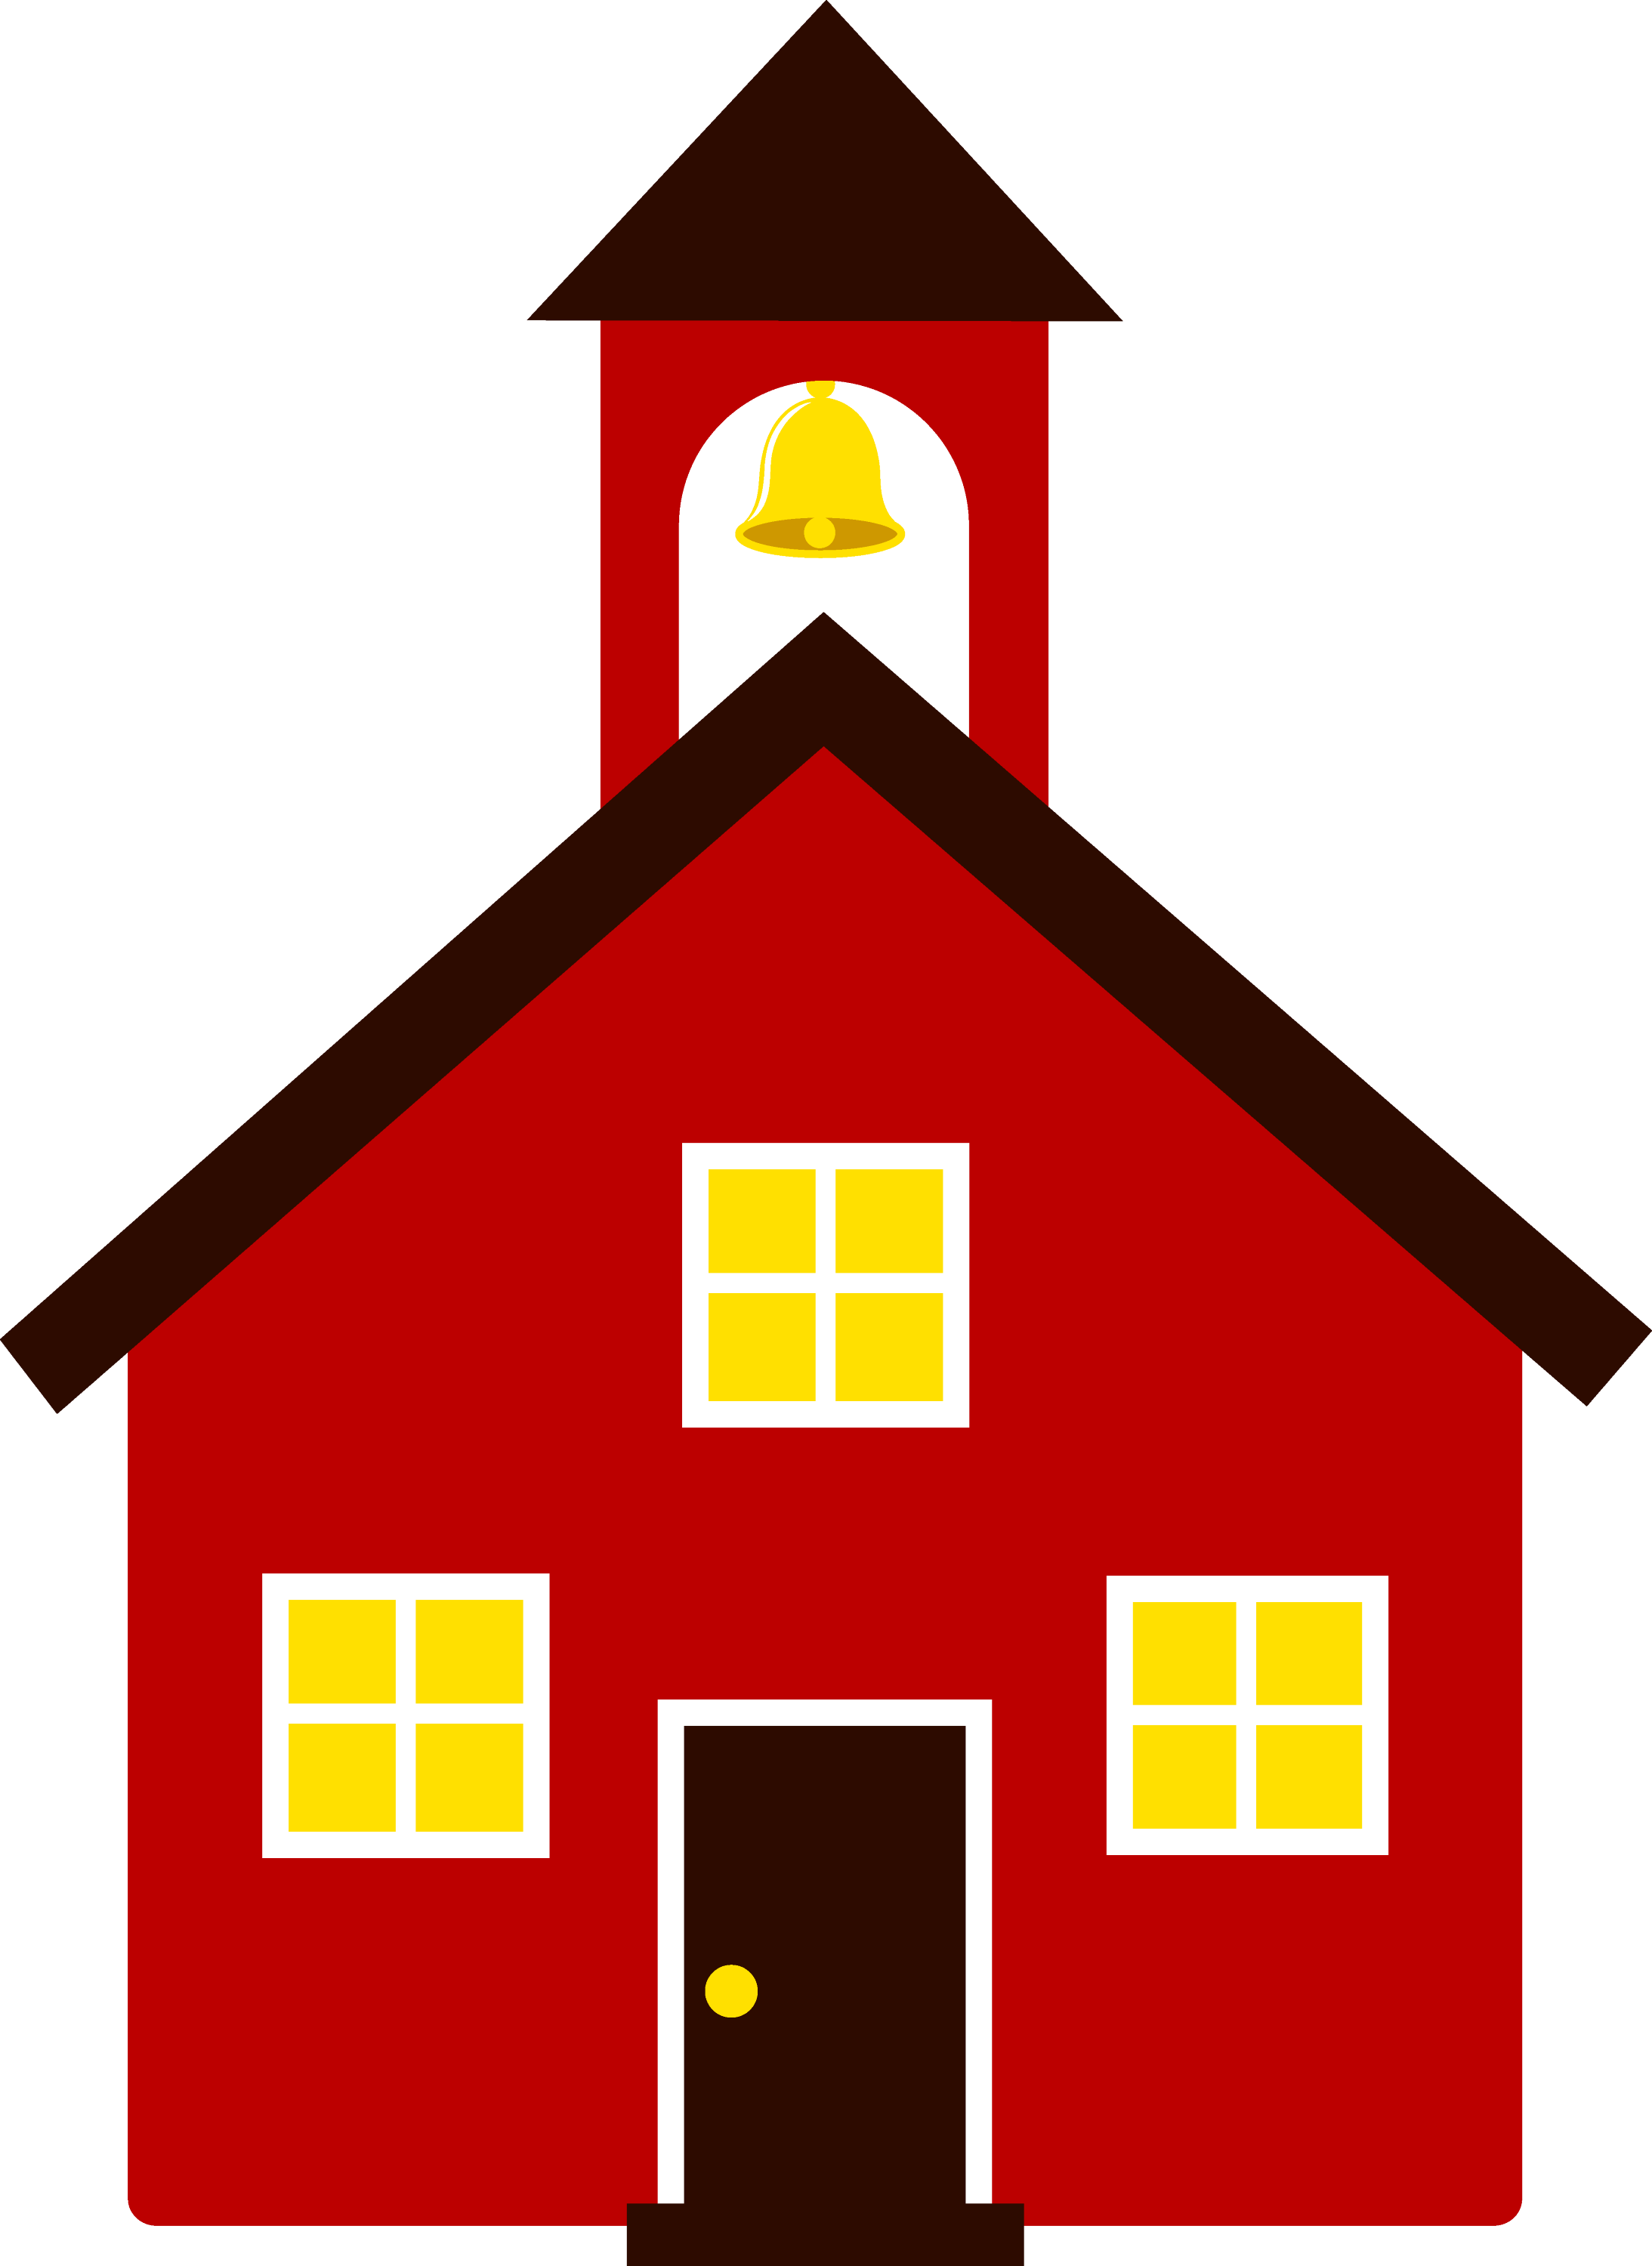 clipart house images free - photo #43